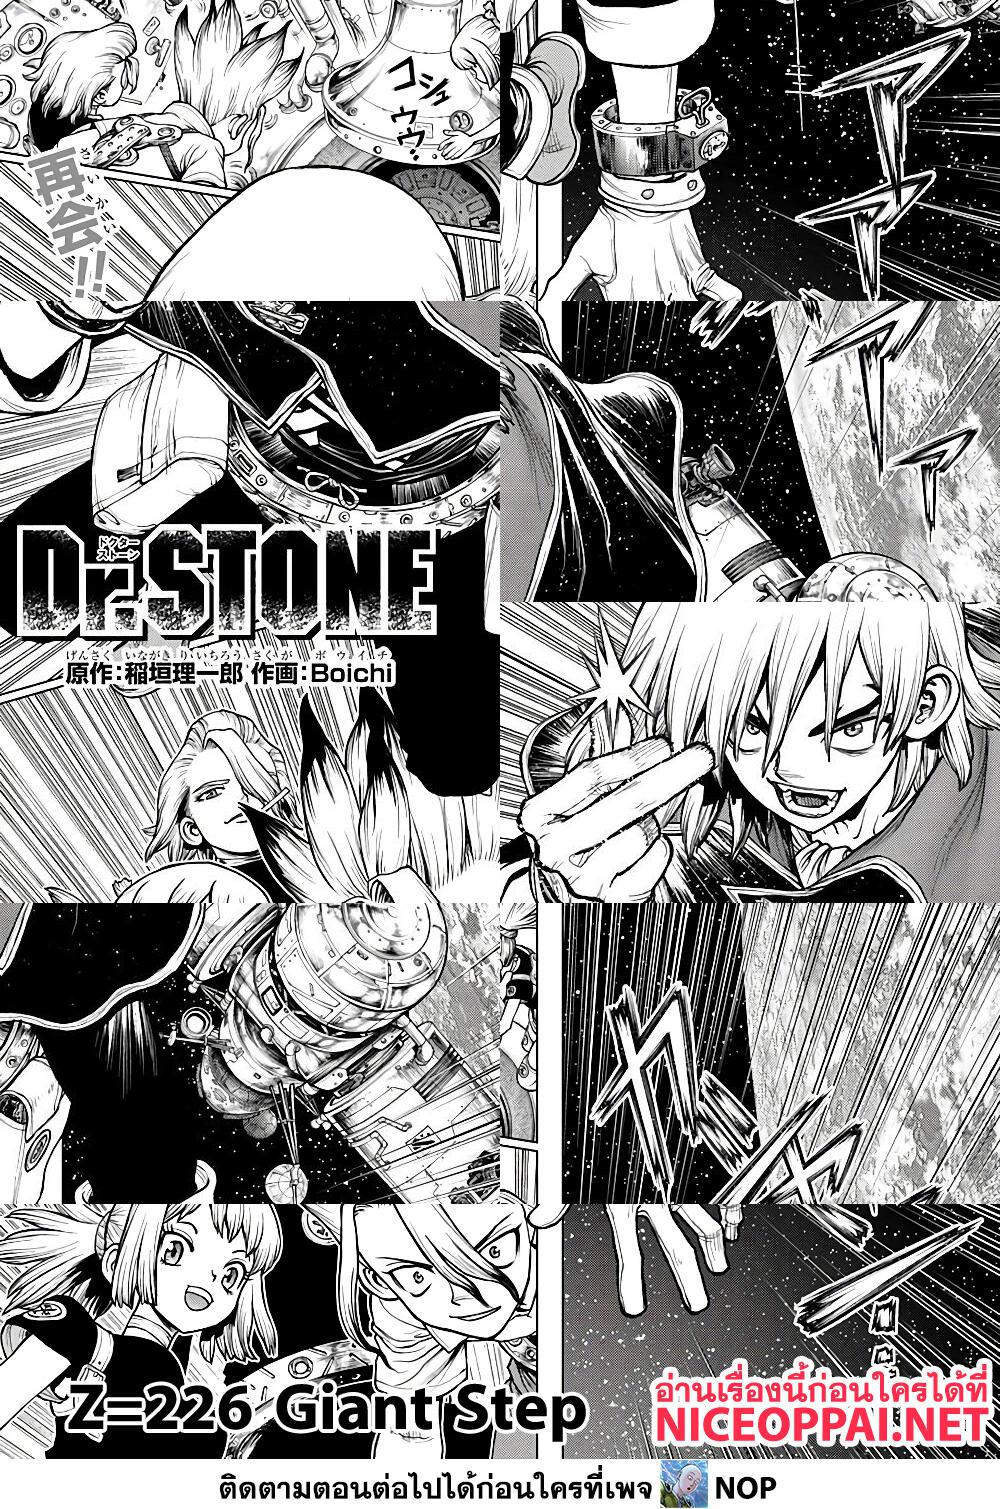 Dr.Stone - Giant Step - 2